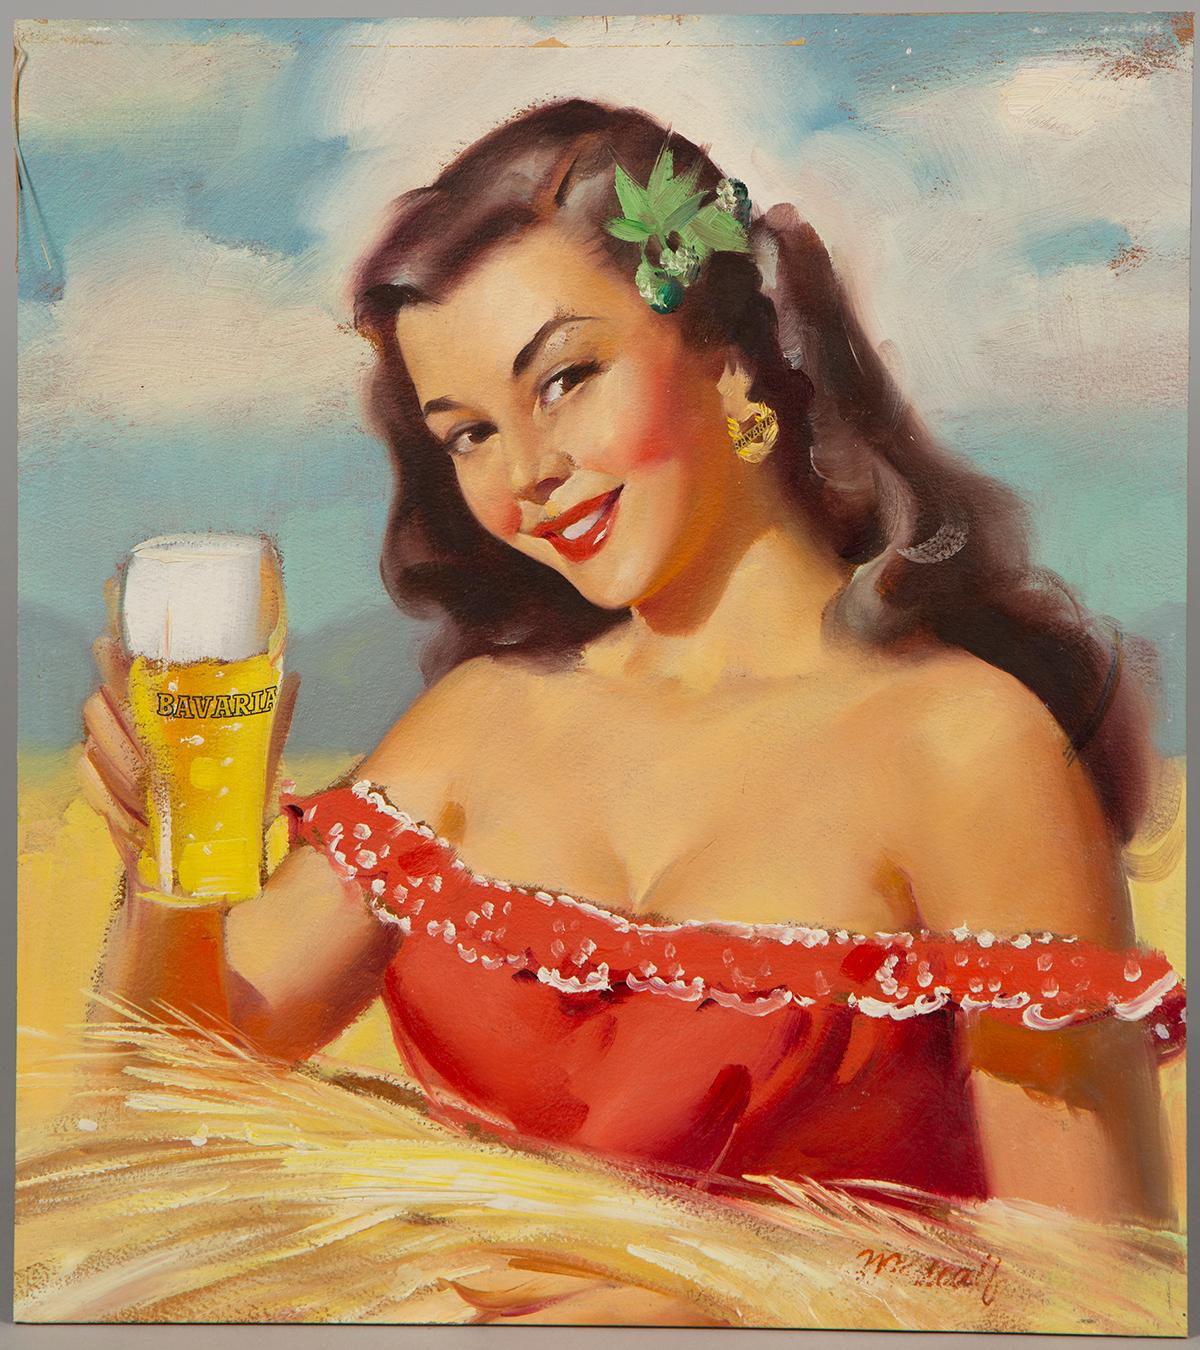 Bavaria Beer Girl - Painting by William (Bill) Medcalf